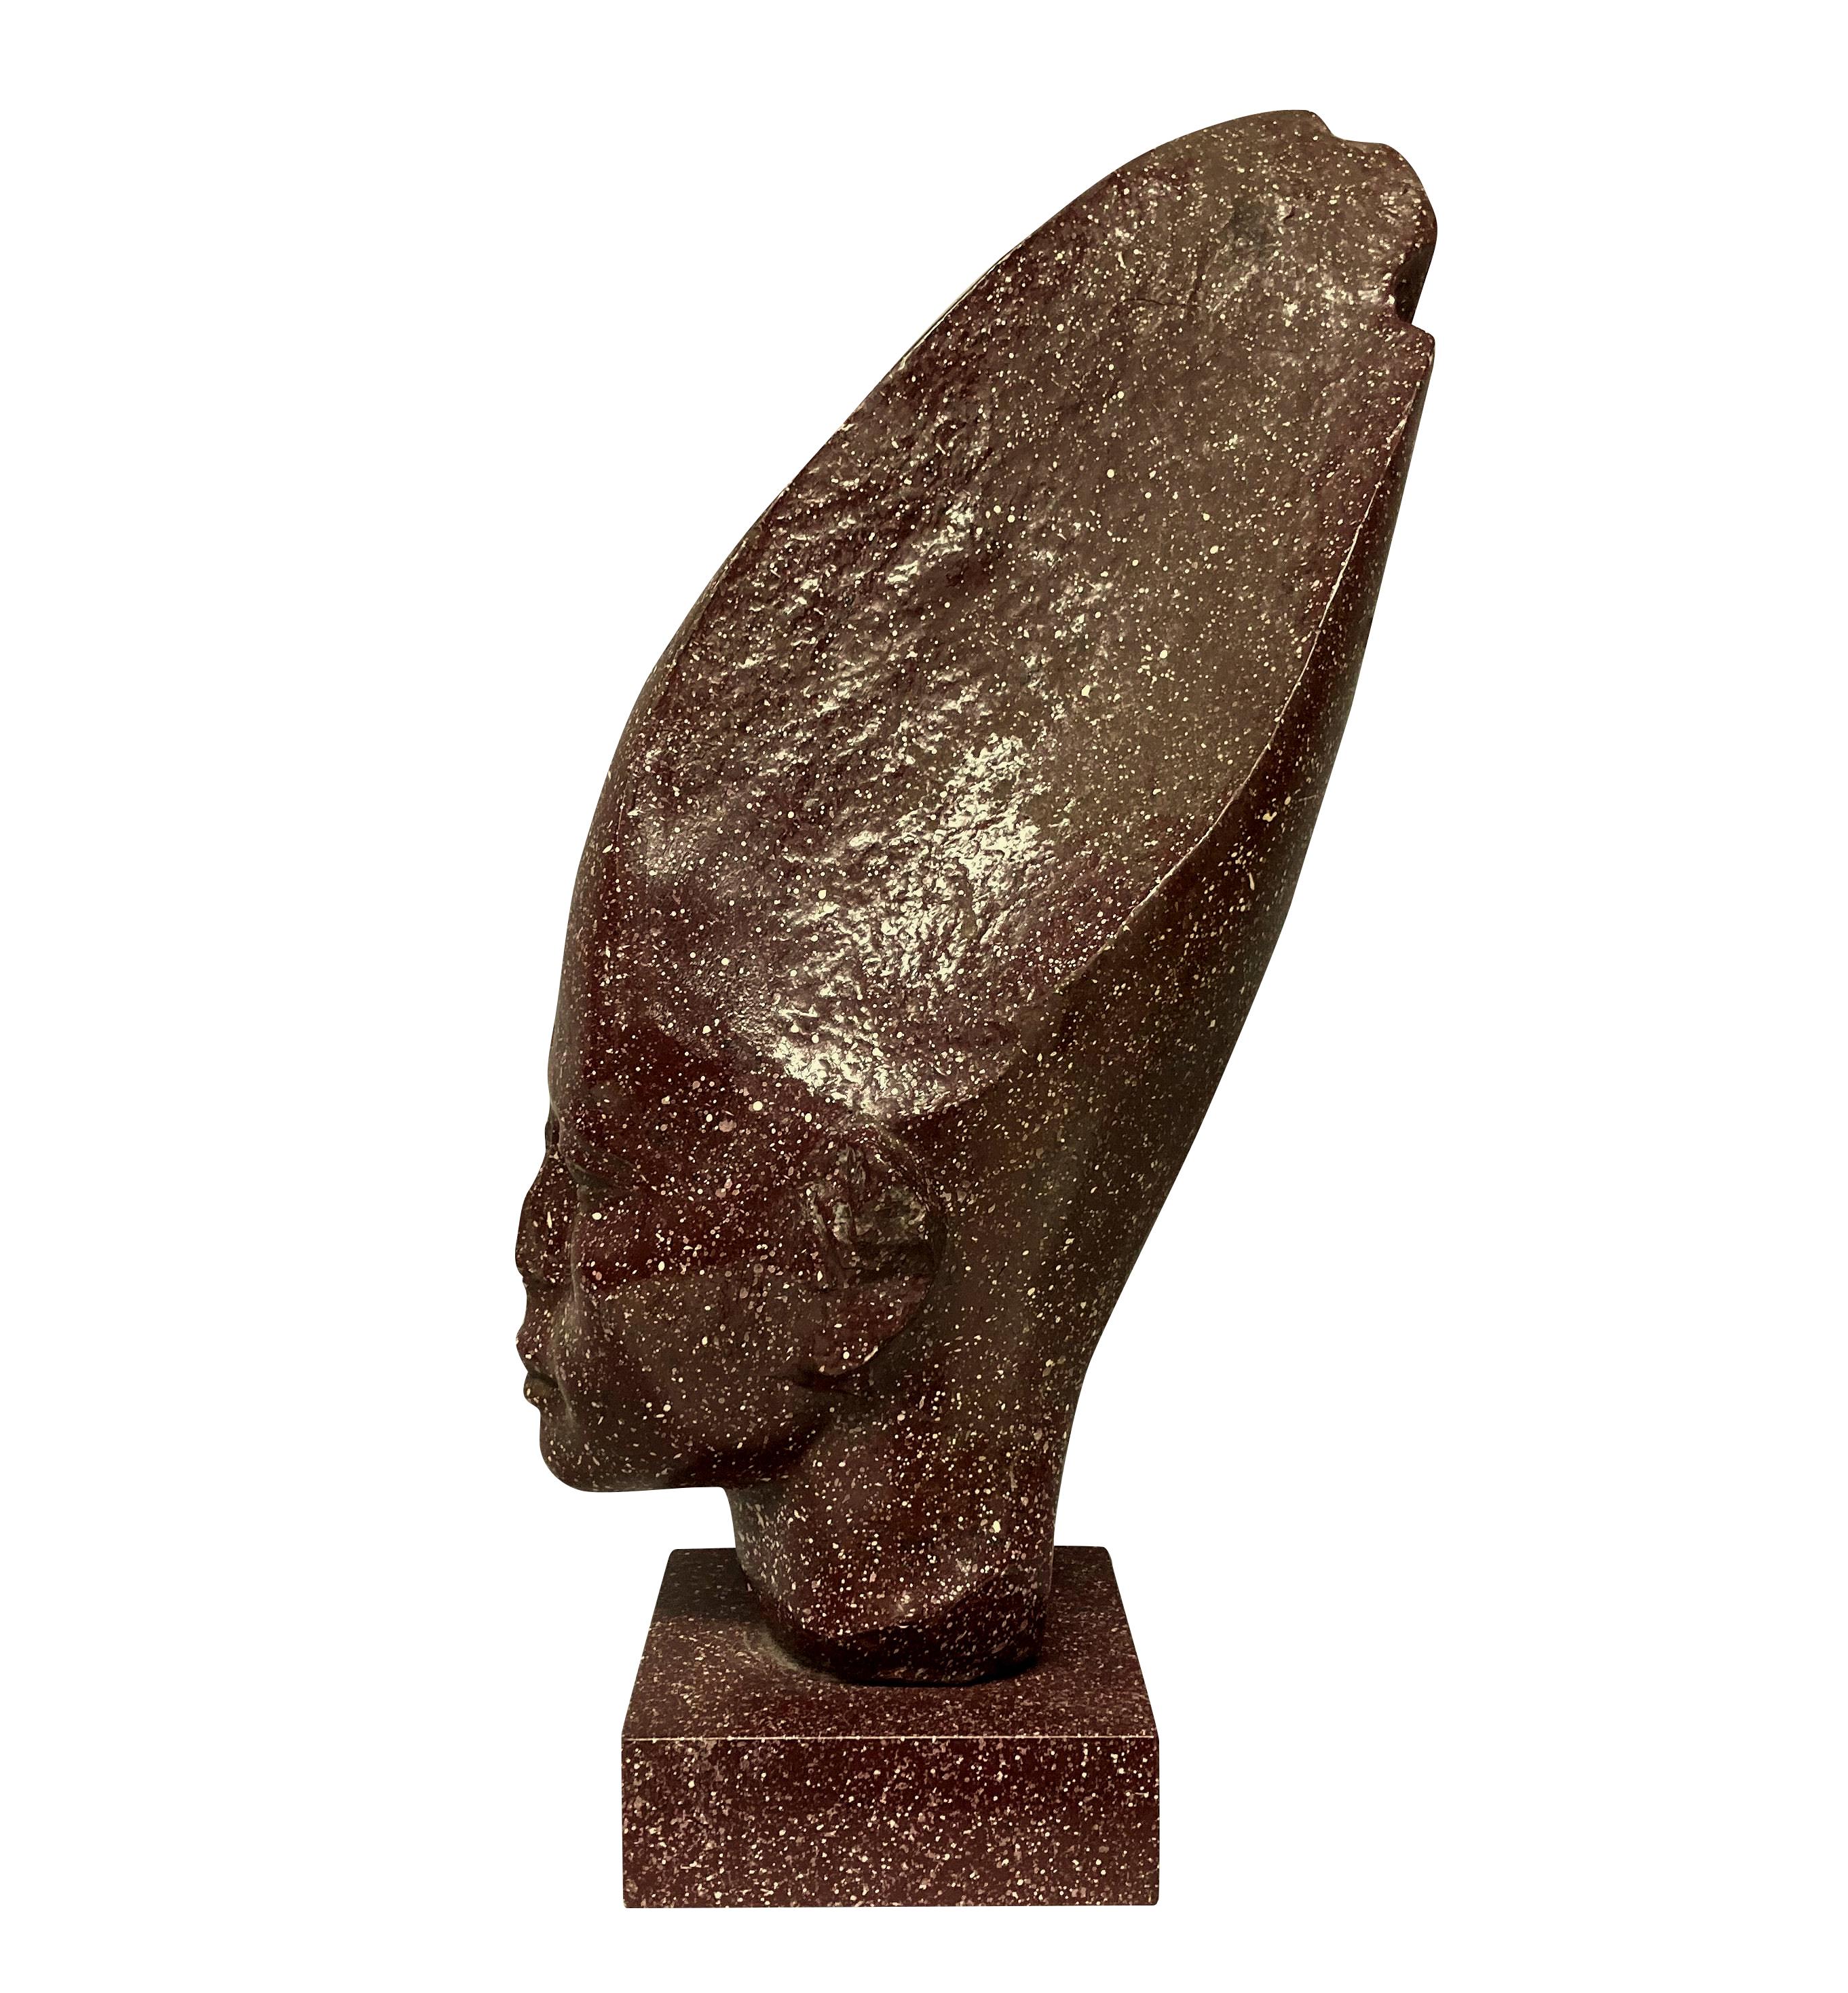 English Faux Porphyry Egyptian Head After the Antique